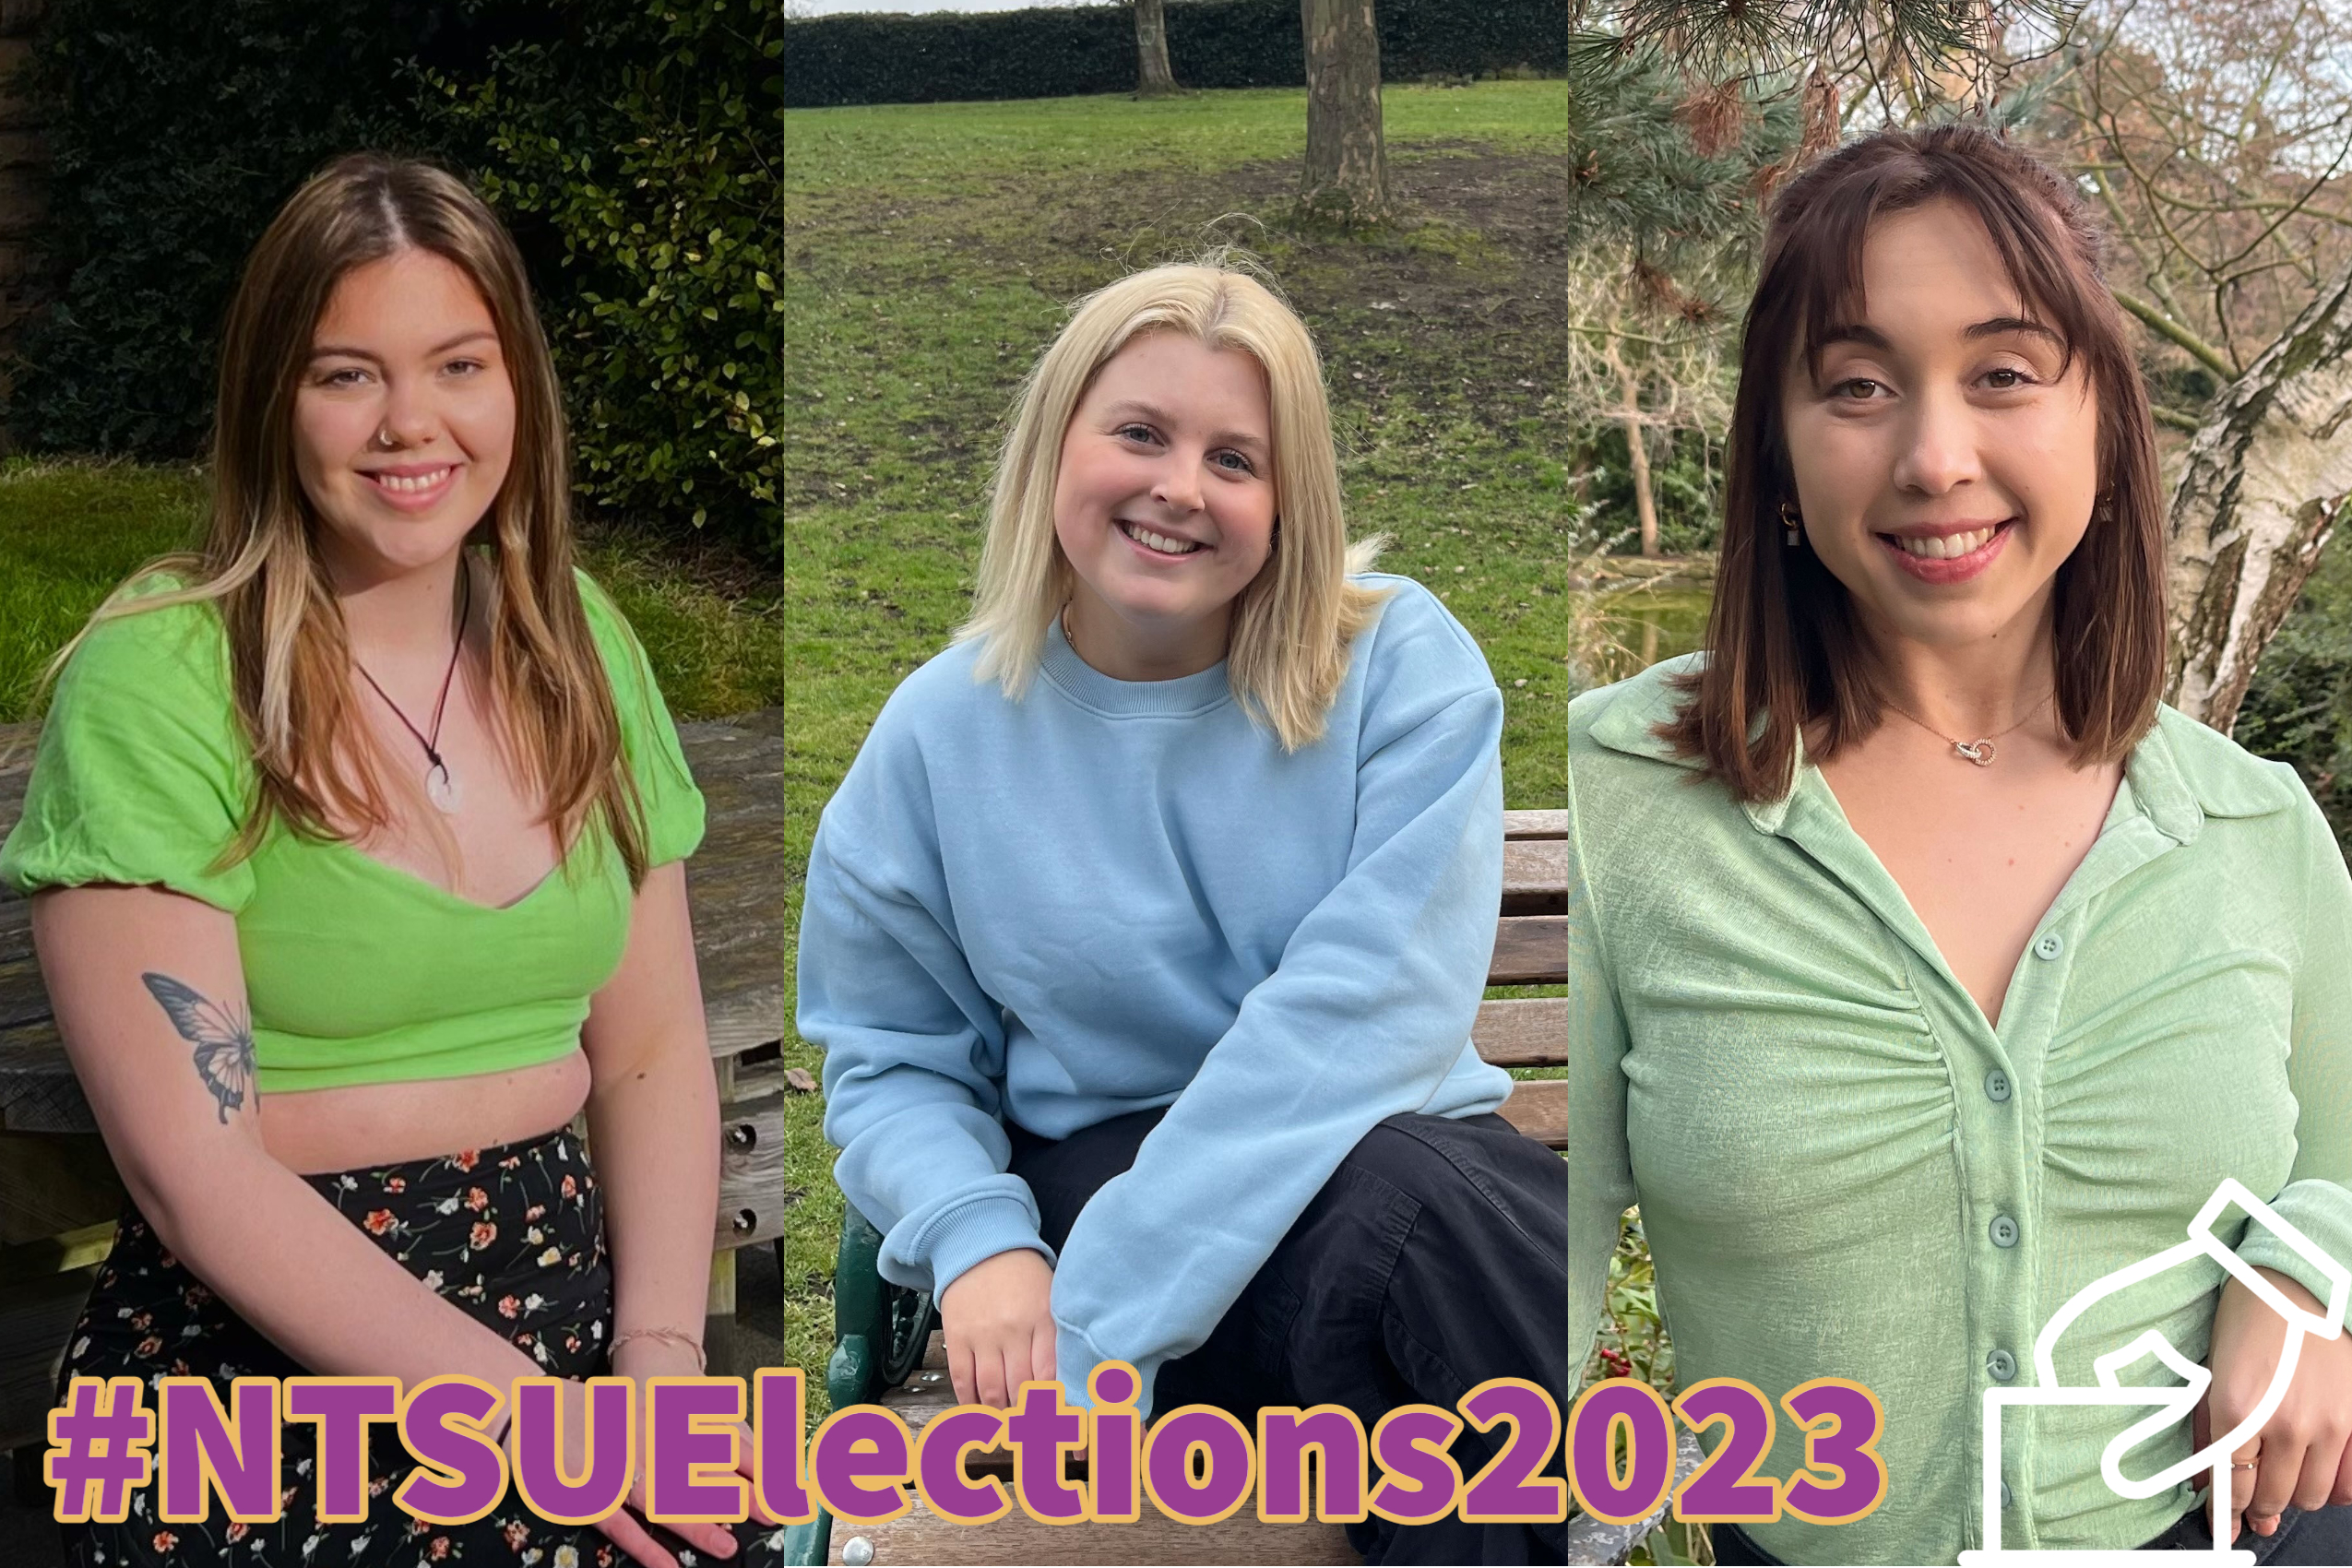 Meet your VP Community and Welfare candidates for #NTSUElections2023